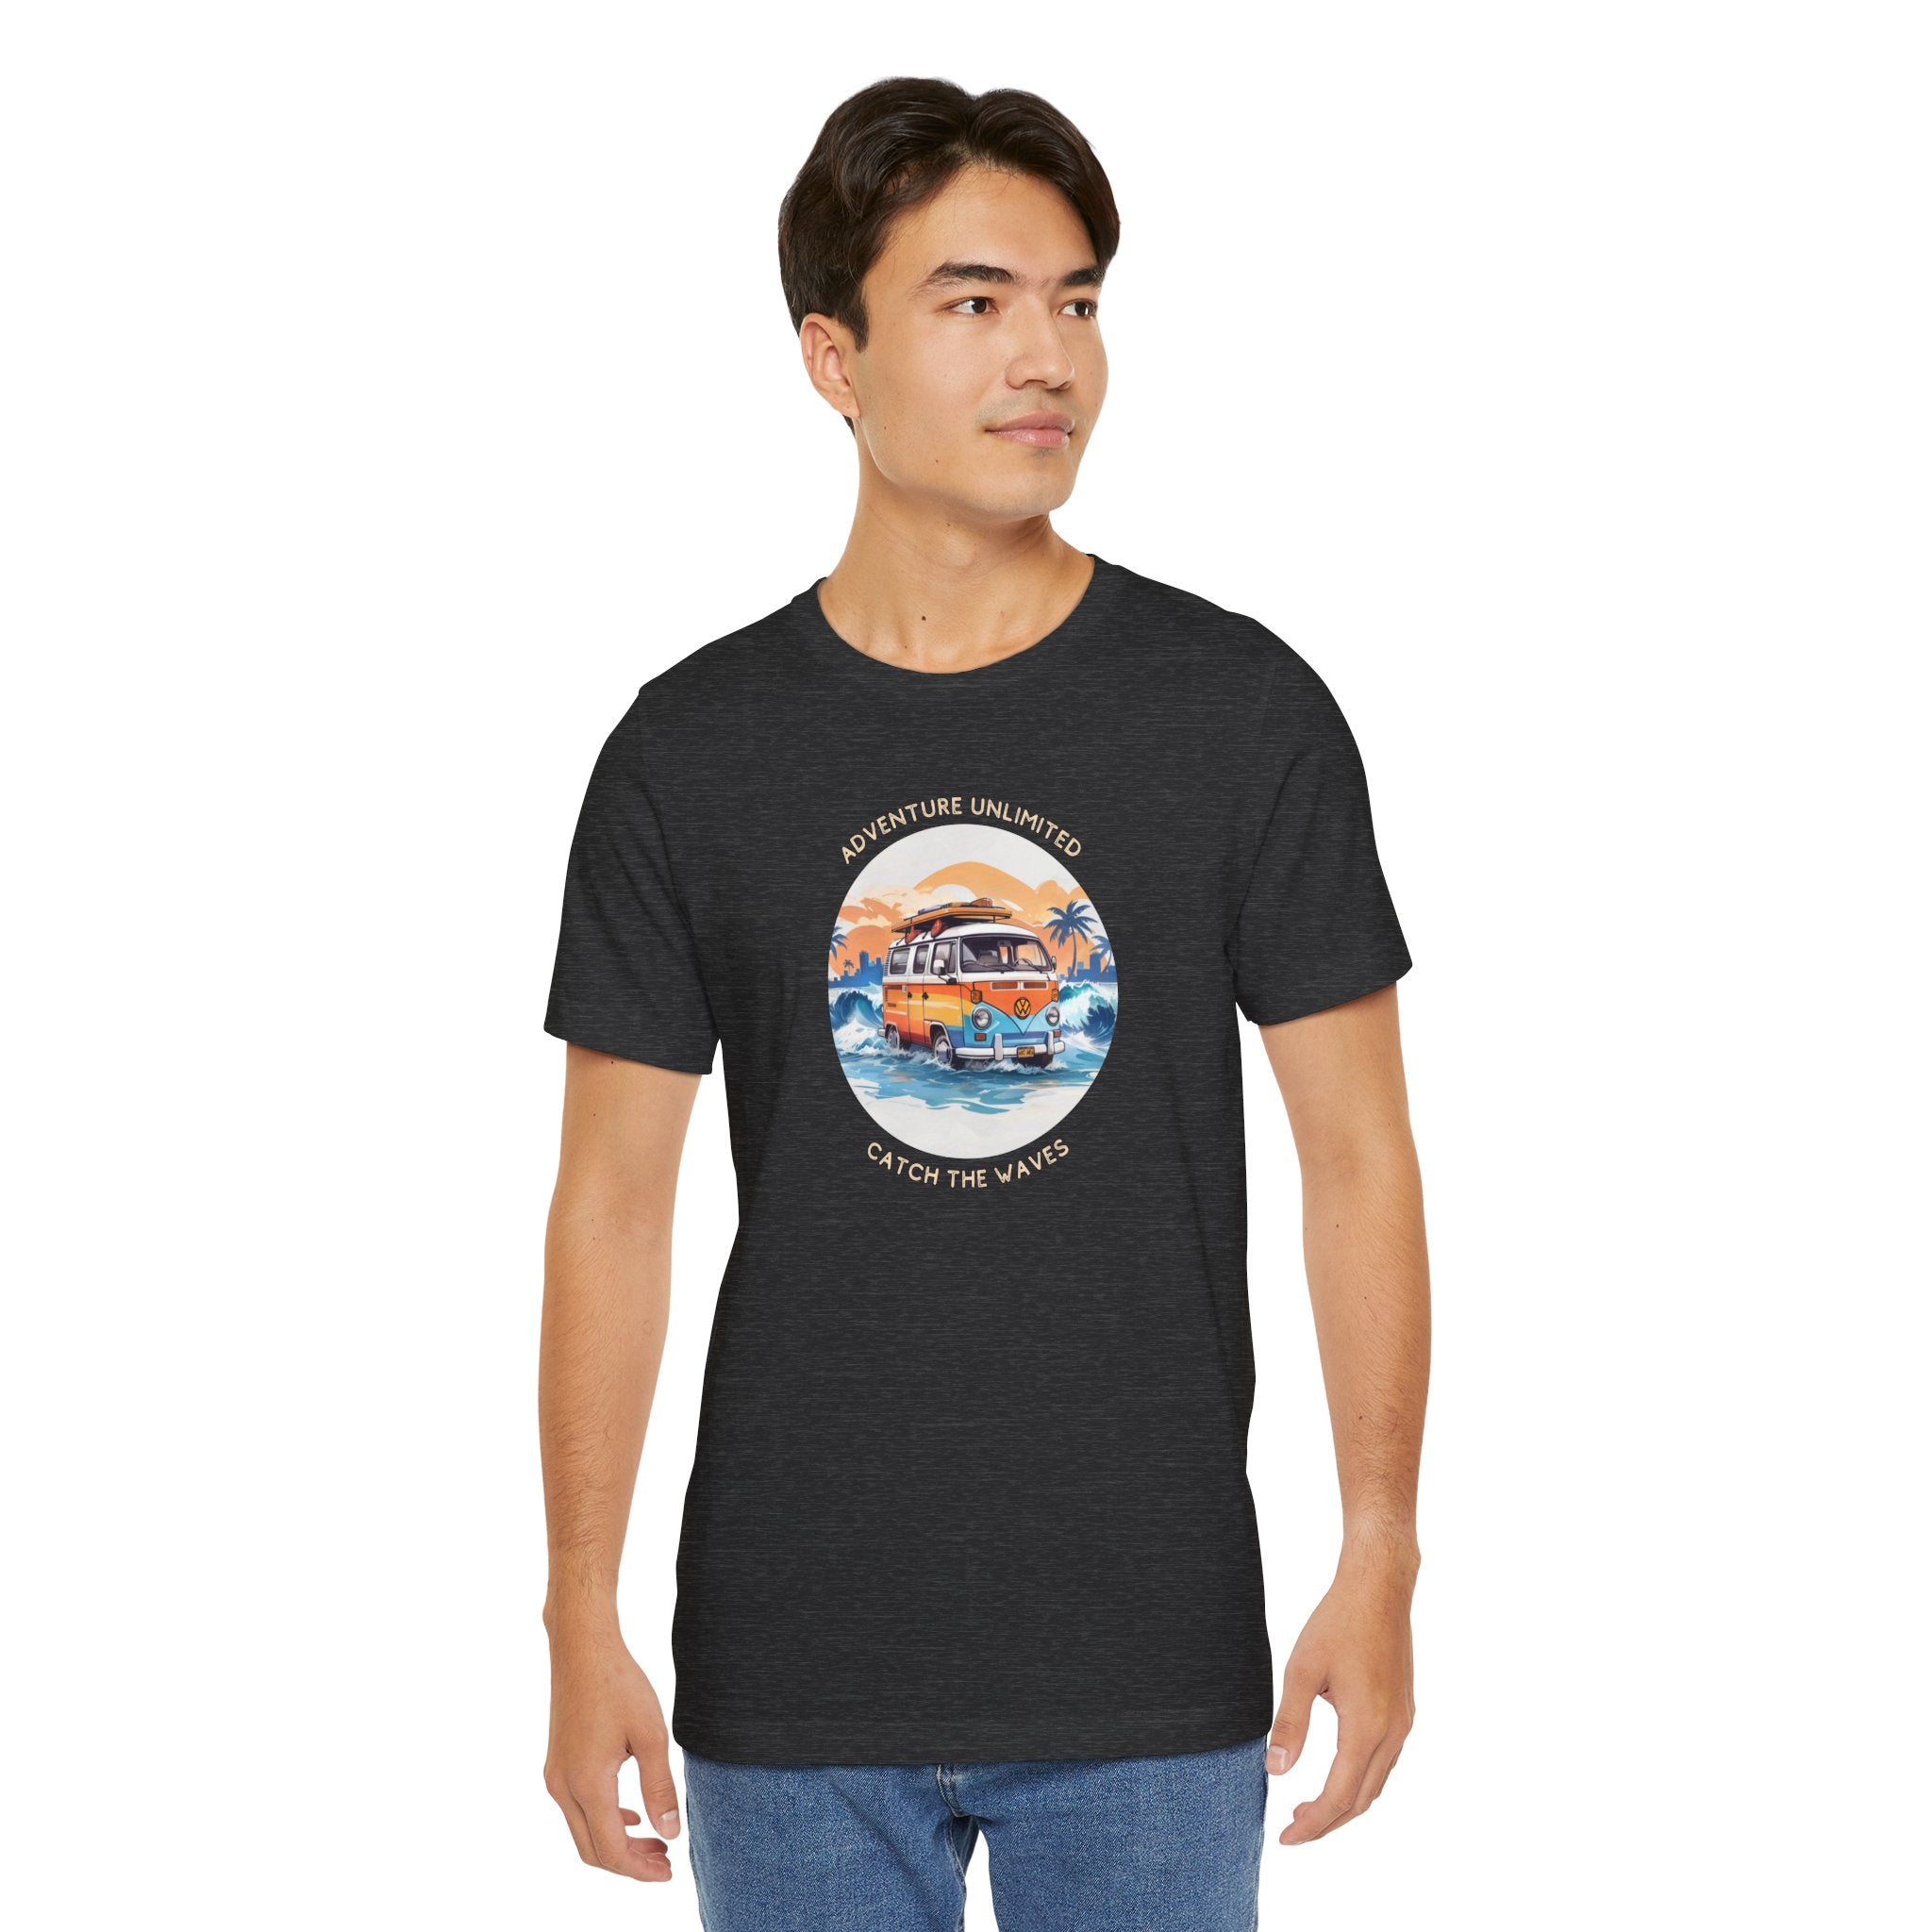 Adventure Unlimited unisex jersey short sleeve tee with a man in black shirt with bus design printed on it